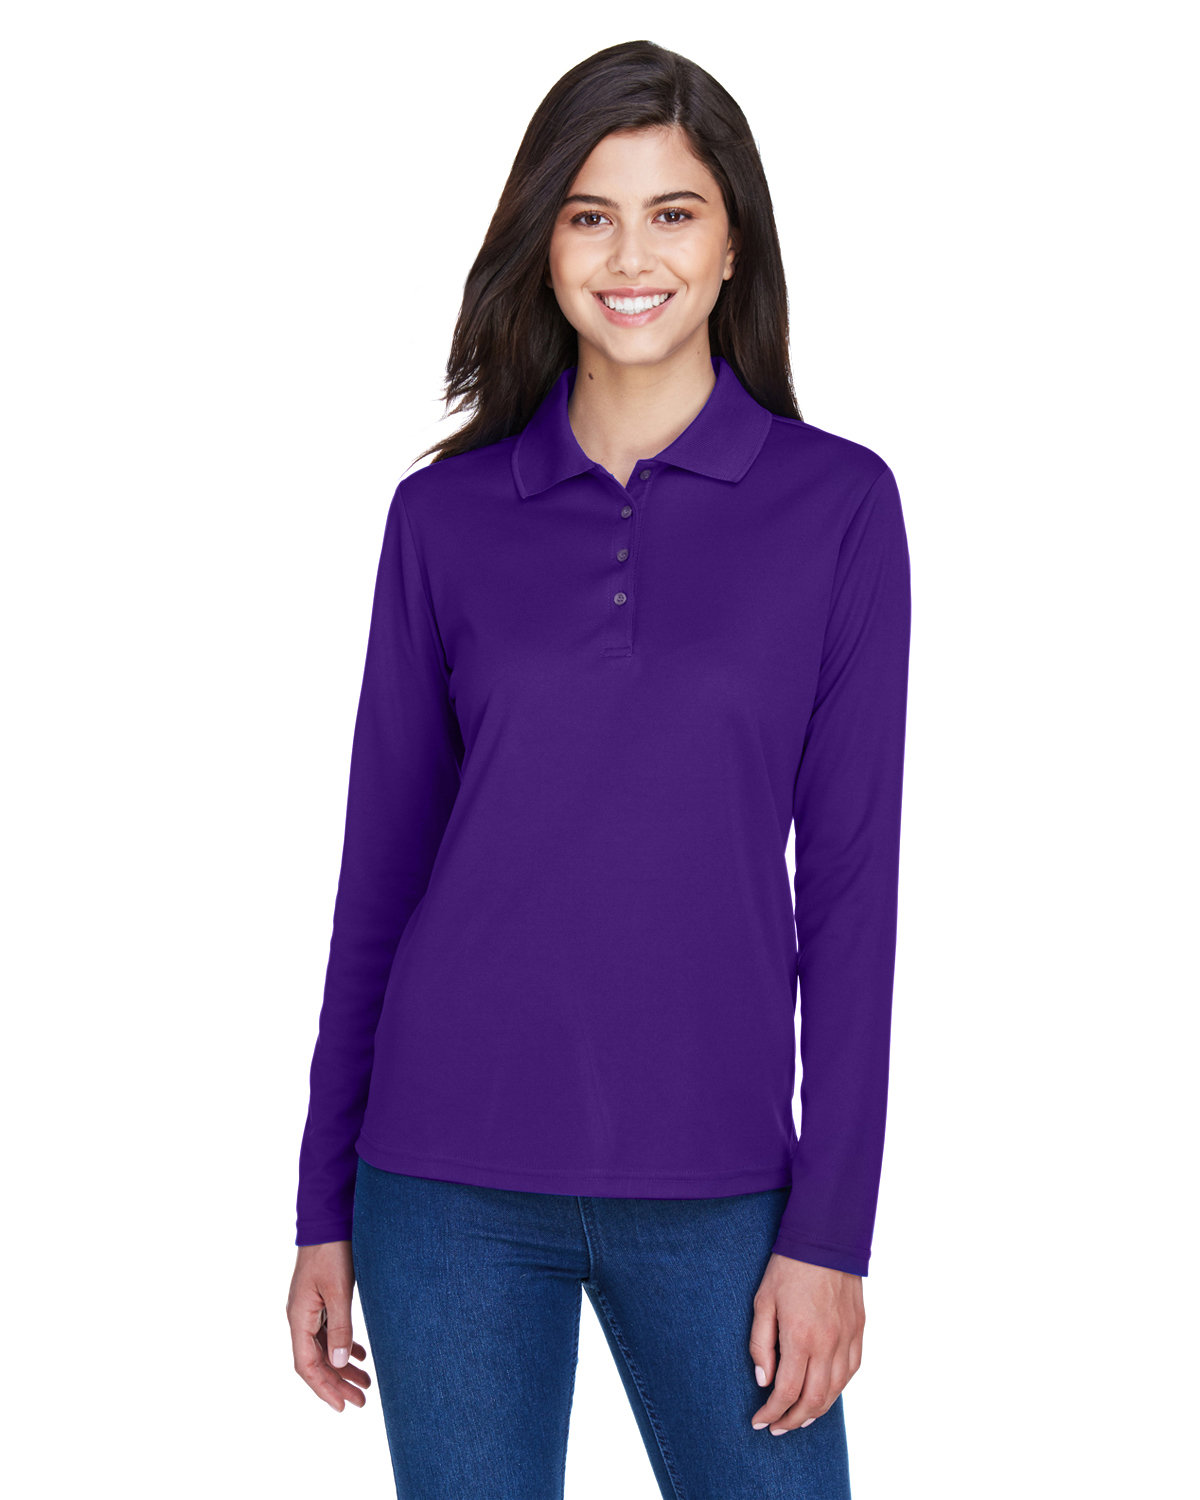 Front view of Ladies’ Pinnacle Performance Long-Sleeve Piqué Polo